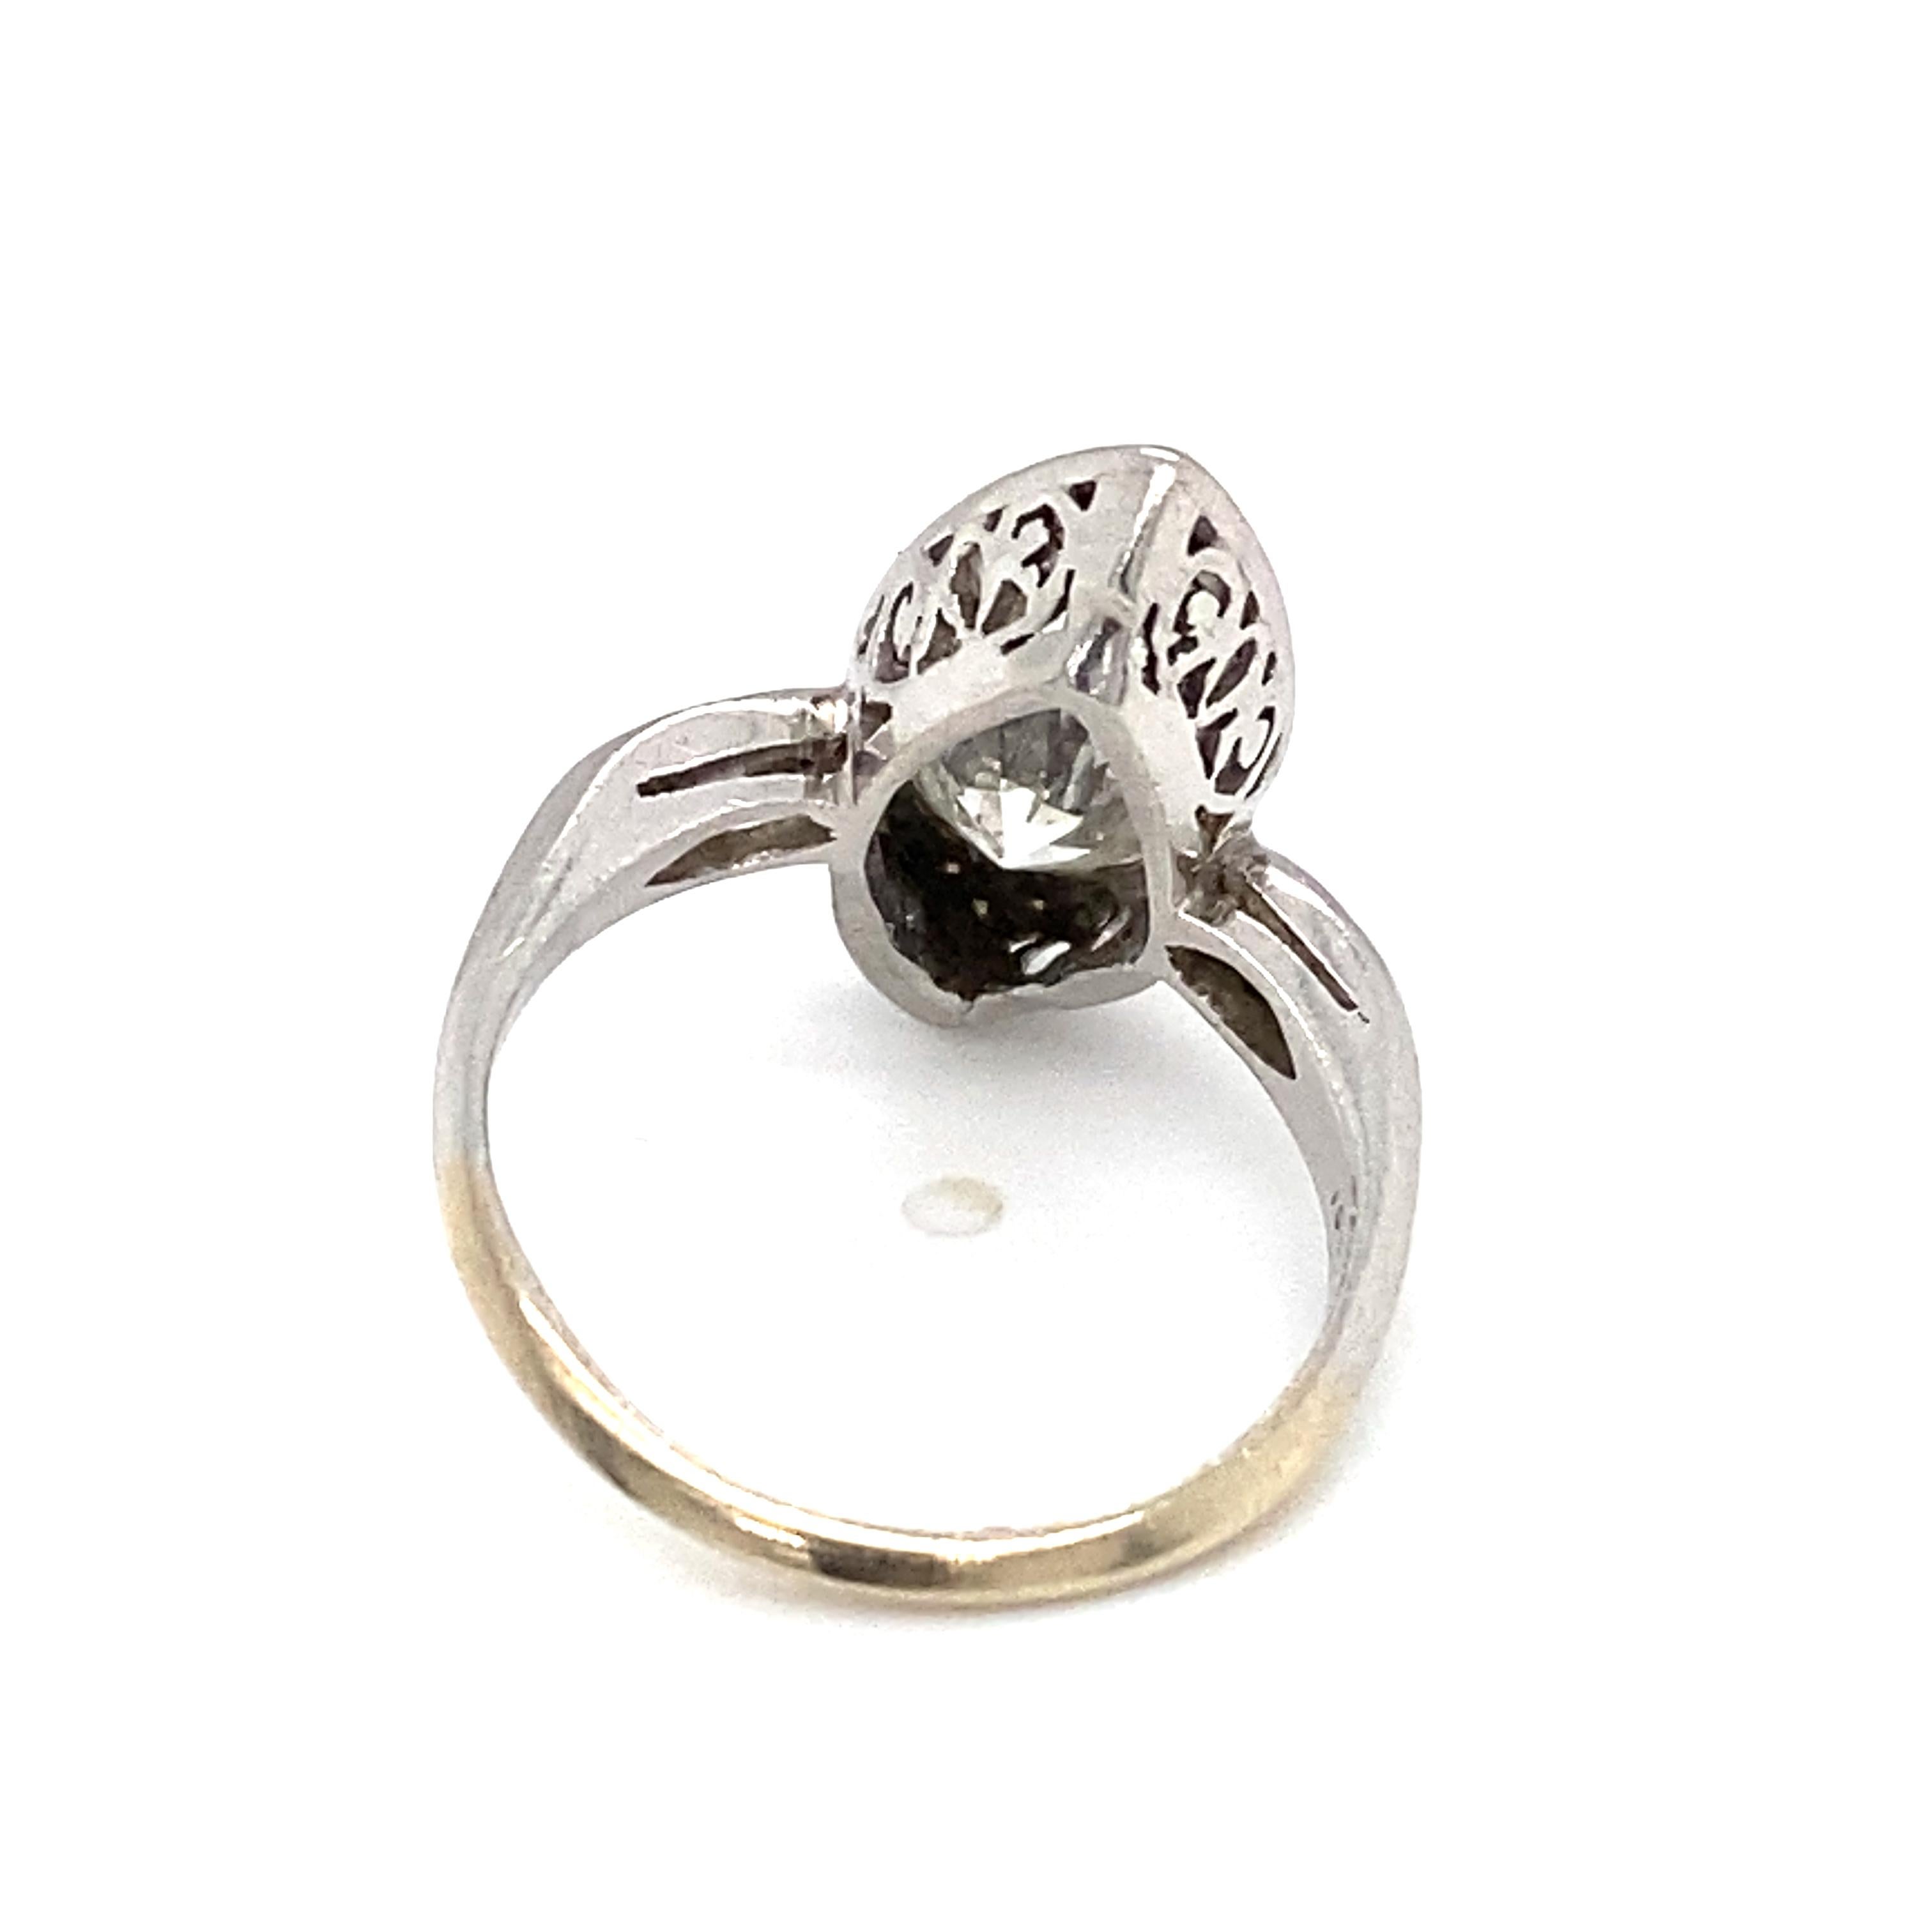 Item Details: This unique Art Deco ring features two Old European cut diamonds and additional accent stones in a navette design, popular in the 1920s and 1930s. 

Circa: 1920s
Metal Type: Platinum
Weight: 3.7g
Size: US 5, resizable

Diamond